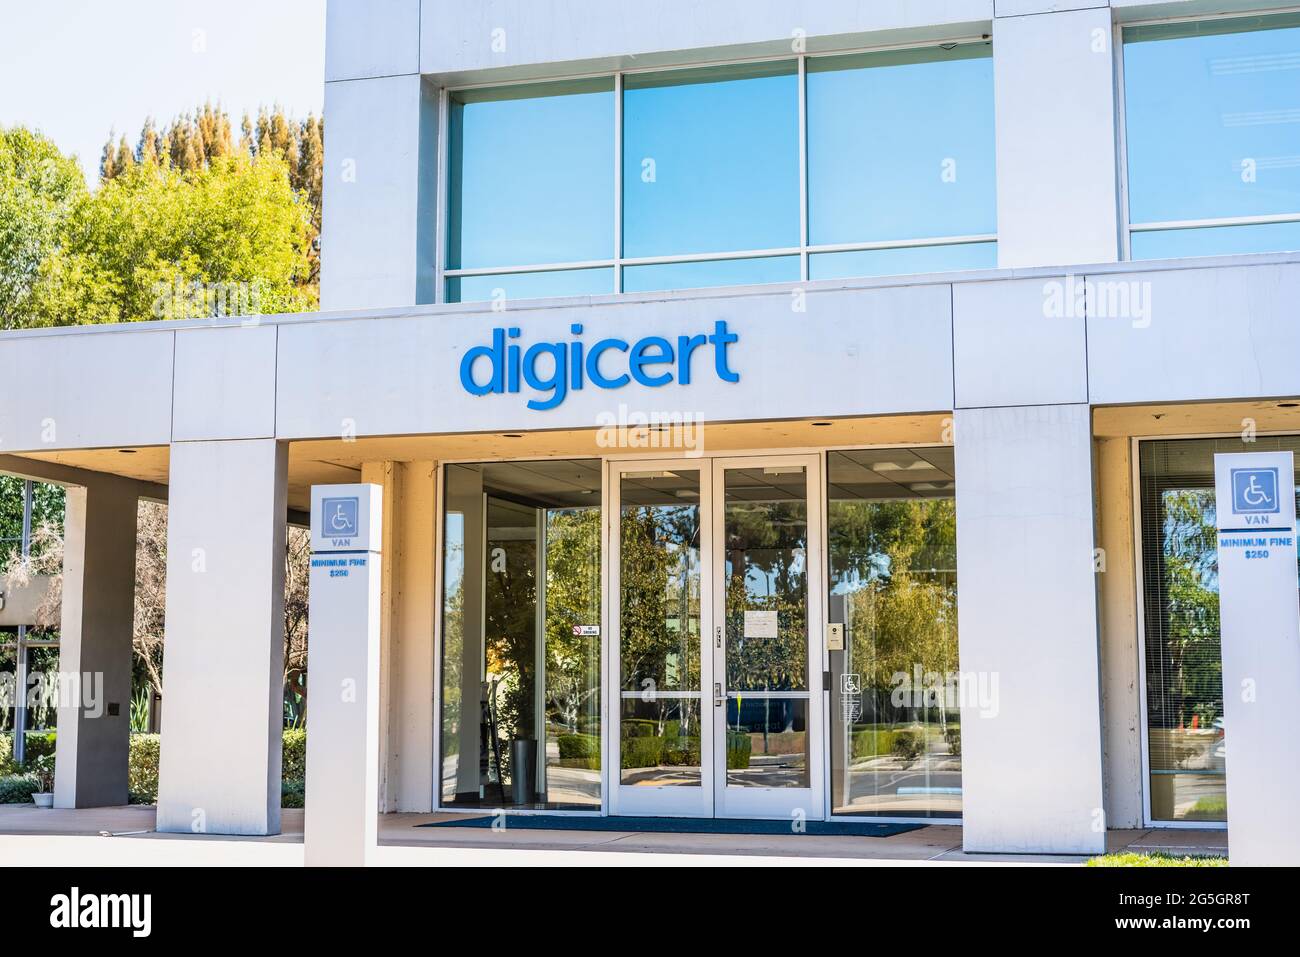 Sep 26, 2020 Mountain View / CA / USA - DigiCert headquarters in Silicon Valley; DigiCert, Inc. is an American technology company focused on digital s Stock Photo